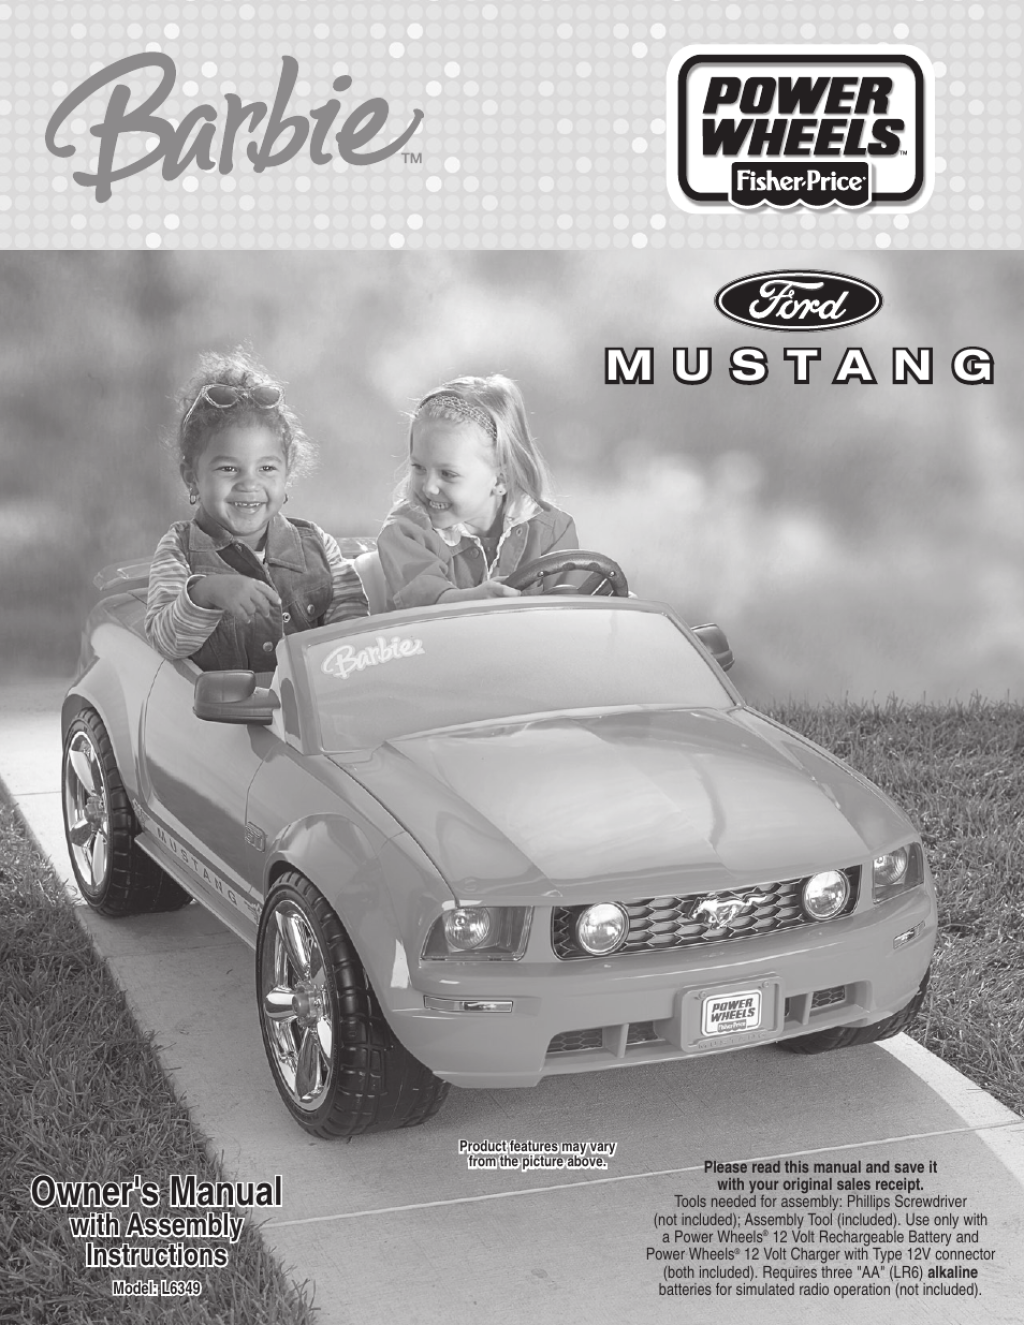 Picture of: Fisher-Price Barbie Ford Mustang L User Manual   pages